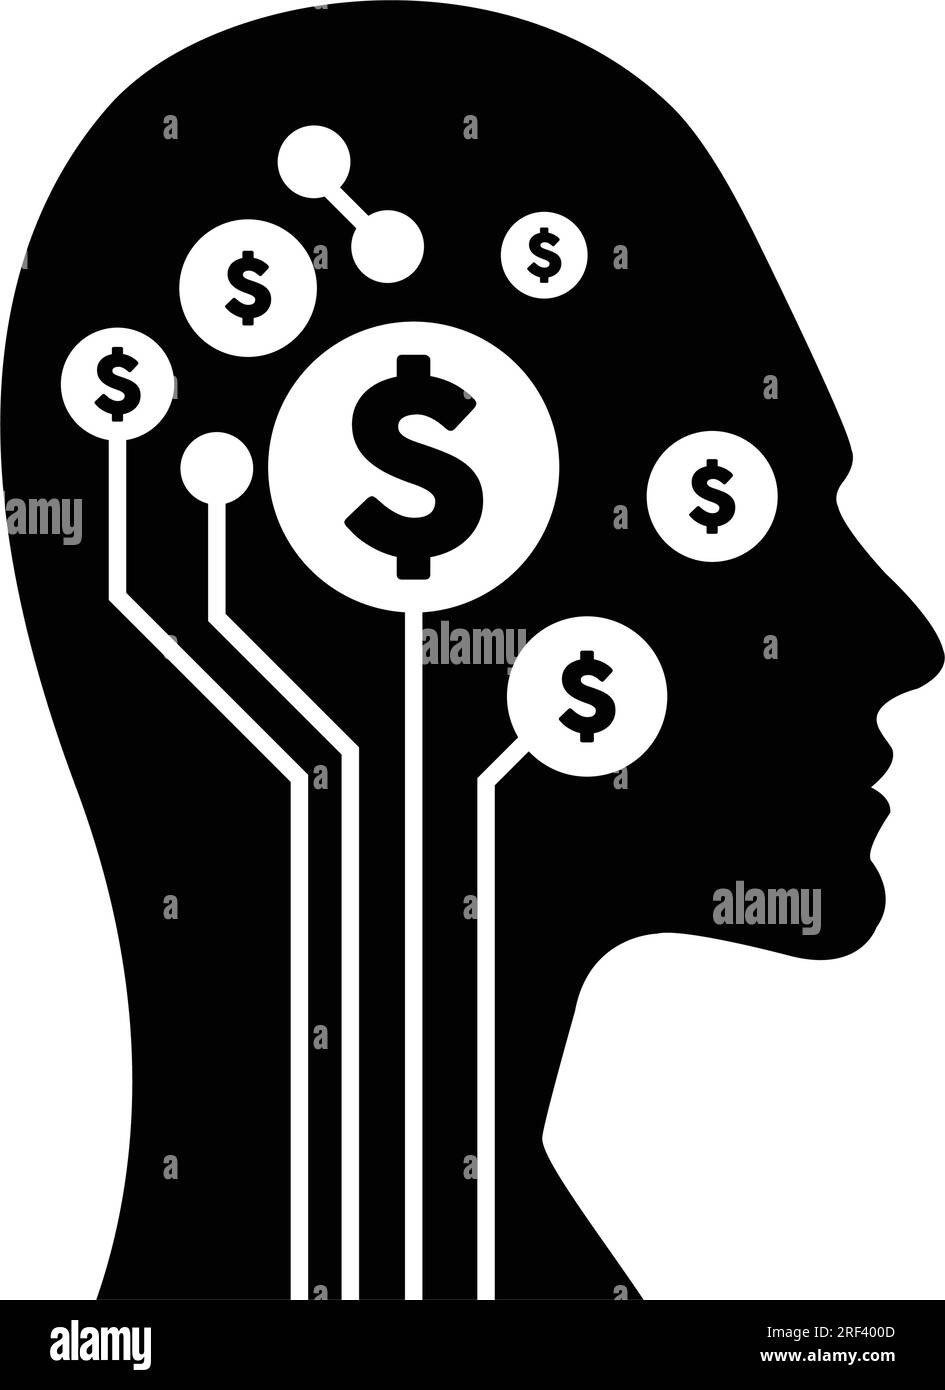 Digital dollar sign symbol on futuristic human profile with brain chip implant for AI Artificial Intelligence money mind illustration. Stock Vector